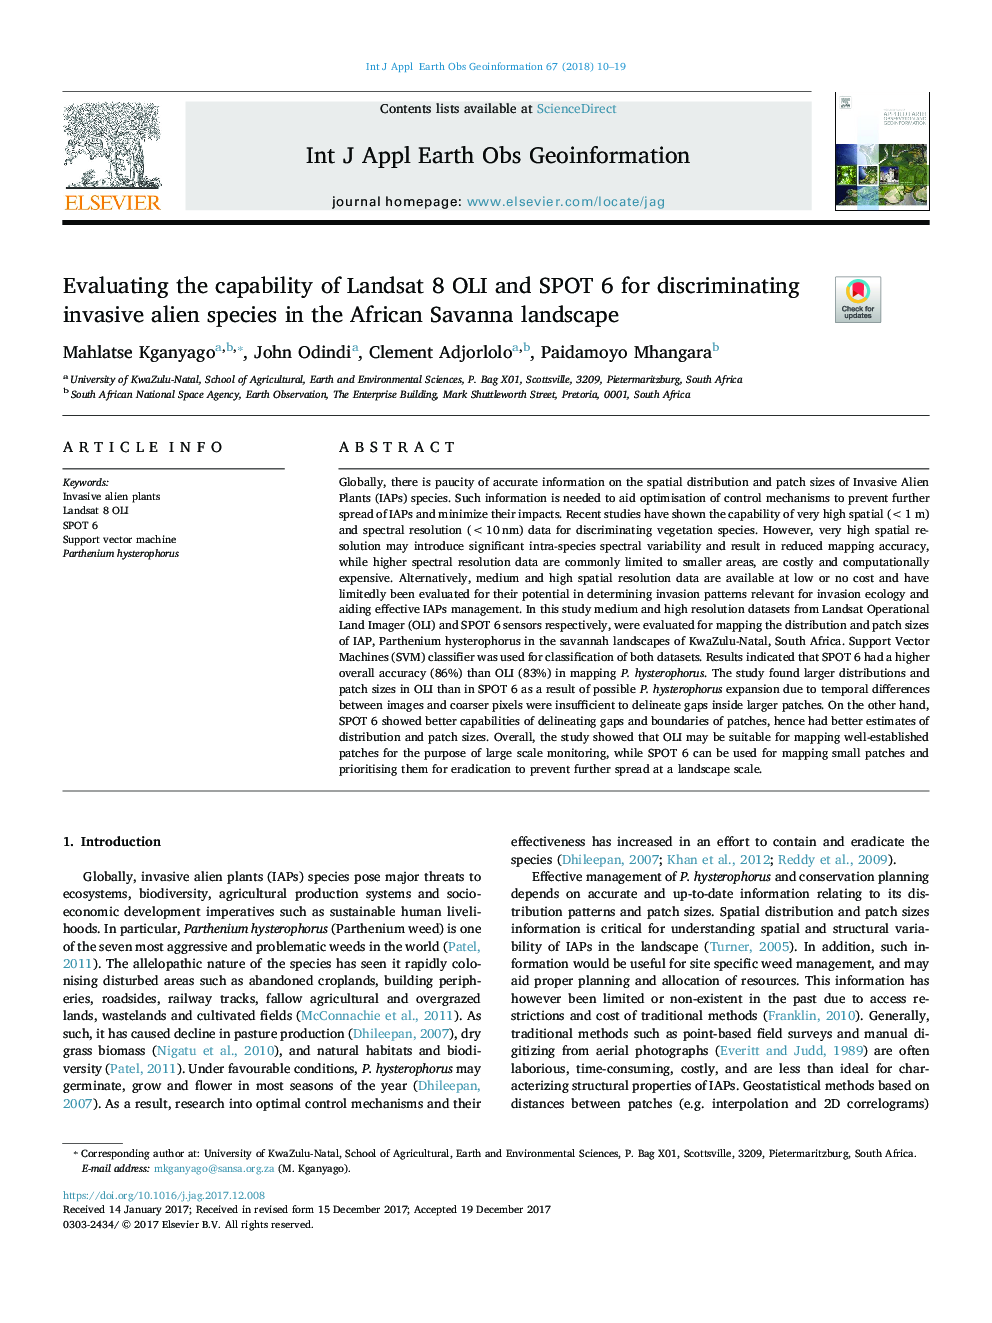 Evaluating the capability of Landsat 8 OLI and SPOT 6 for discriminating invasive alien species in the African Savanna landscape